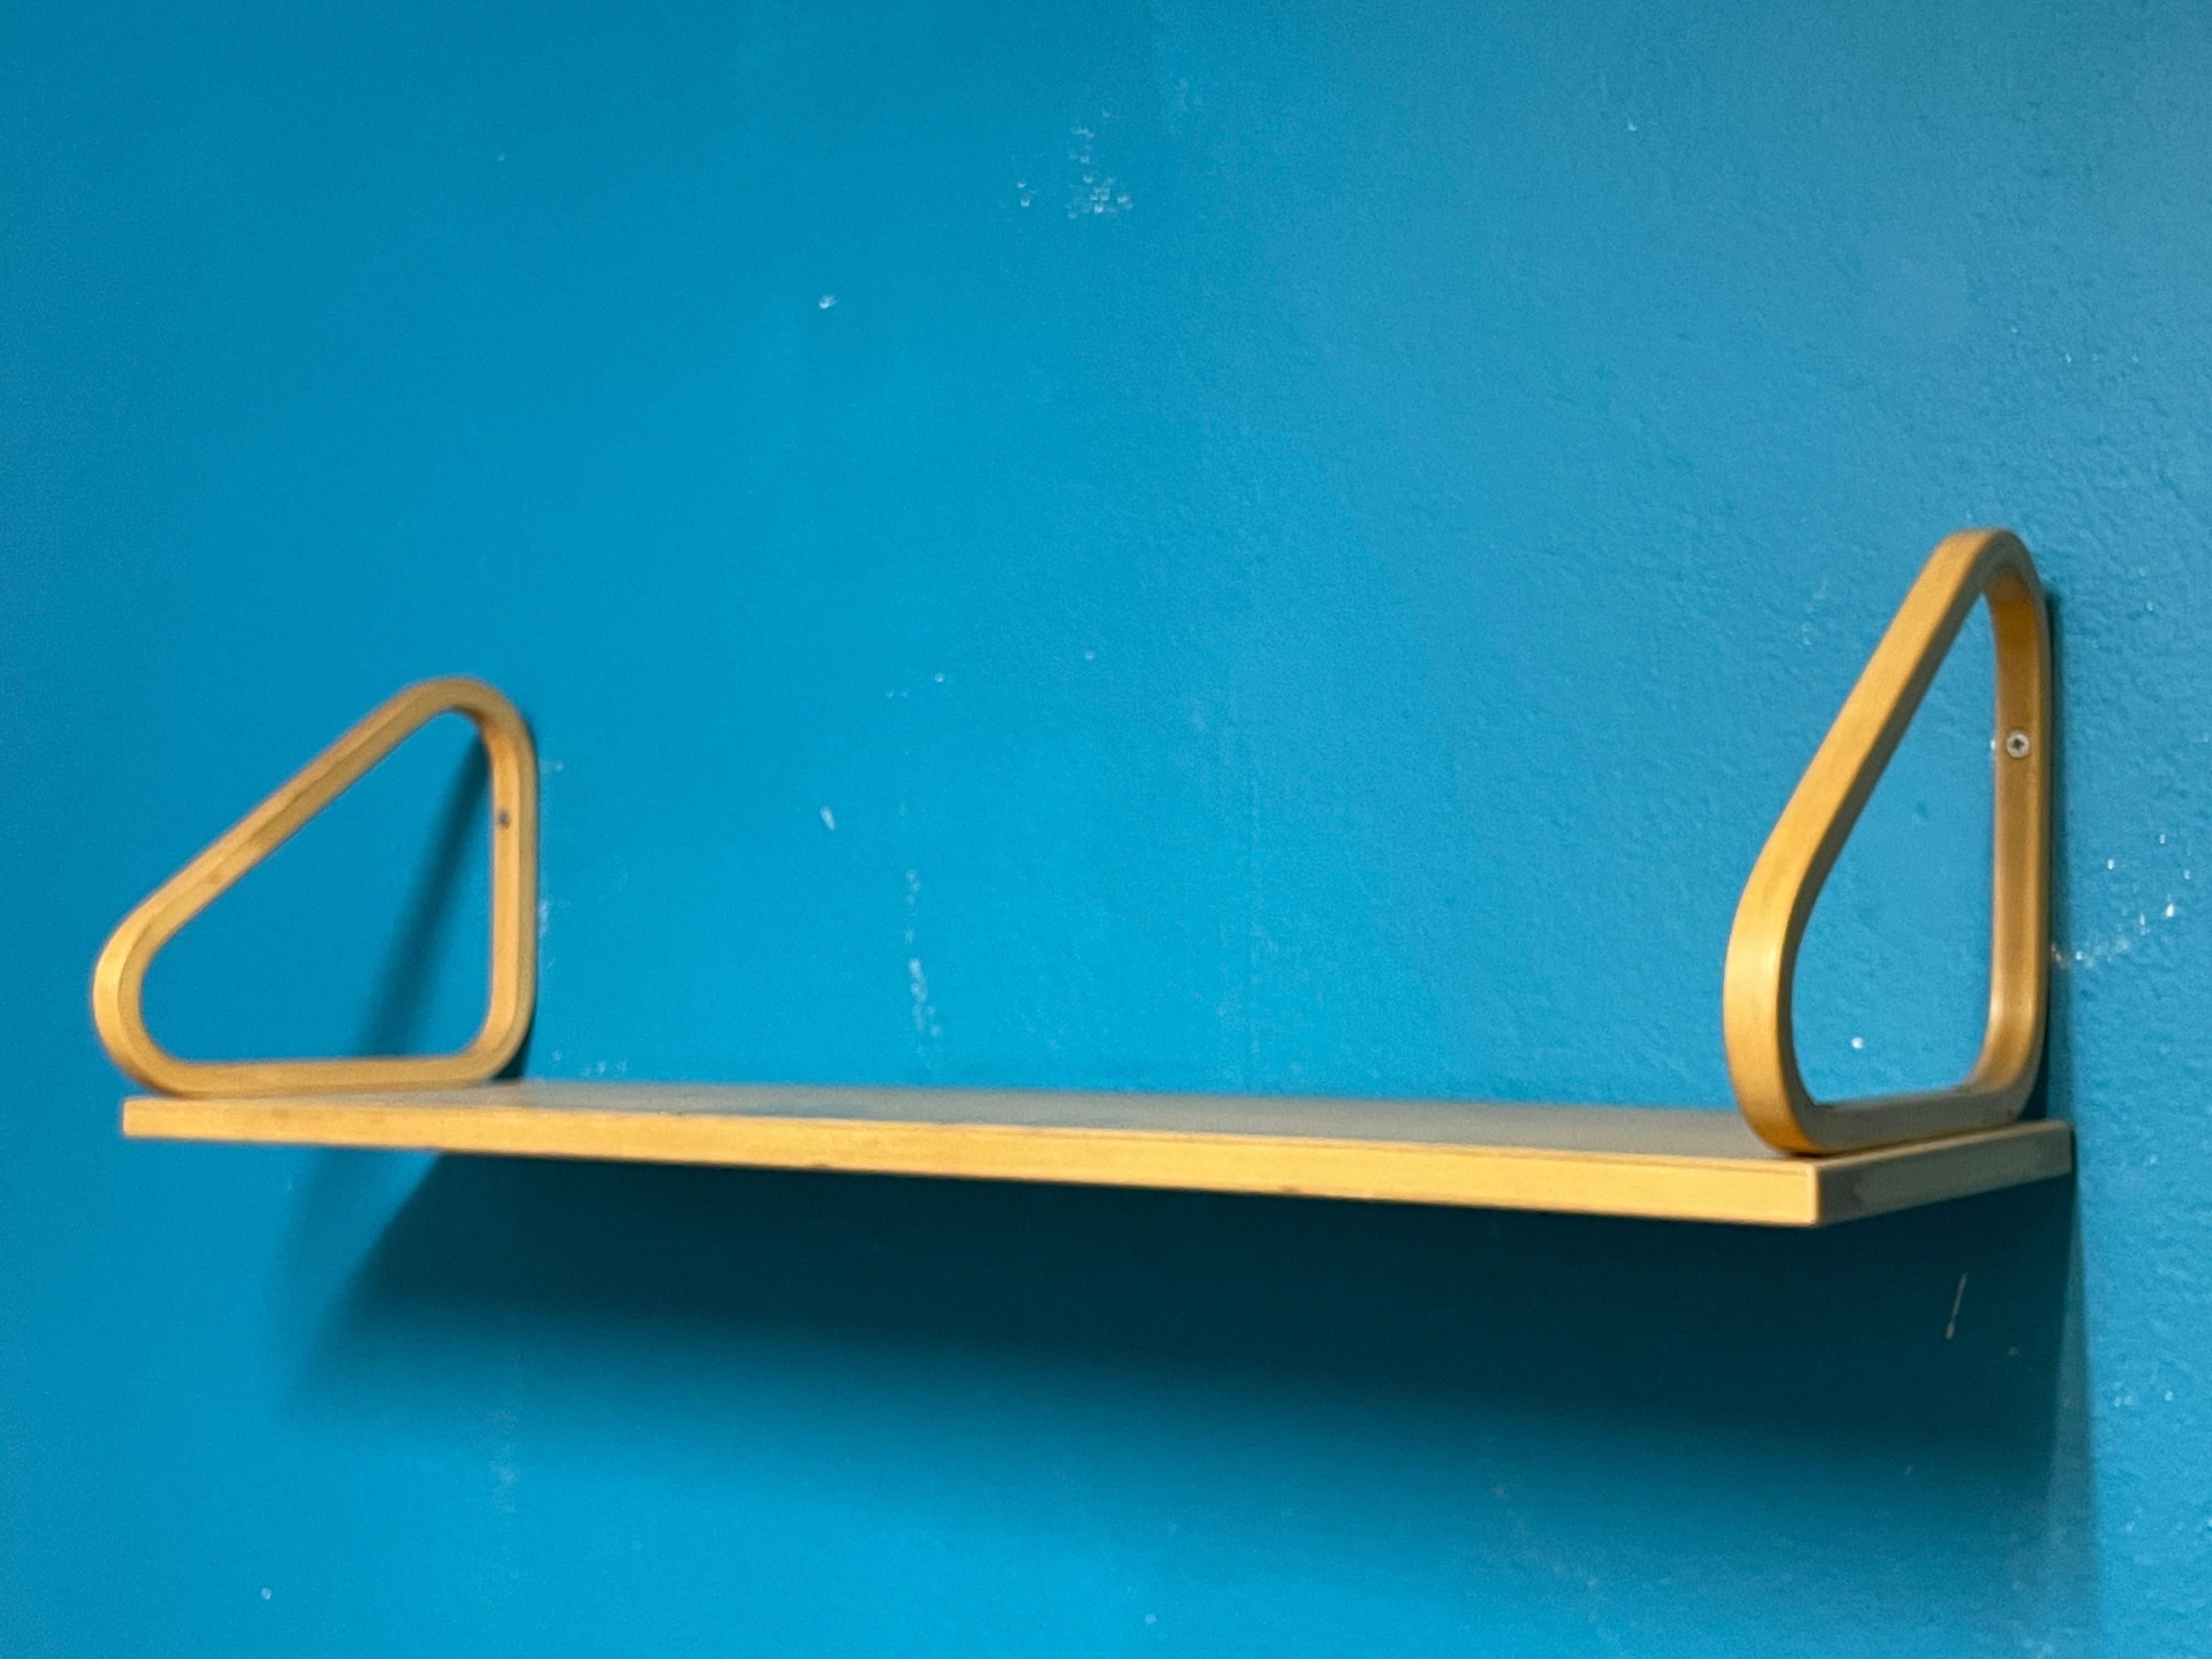 Artek's wall shelf 112B is an elegant and practical shelf that can be used for books, decorative lamps or small items. Alvar Aalto designed the wall shelf 112 in 1936.

This one was made in the 1960s and it has finger-joint construction and original